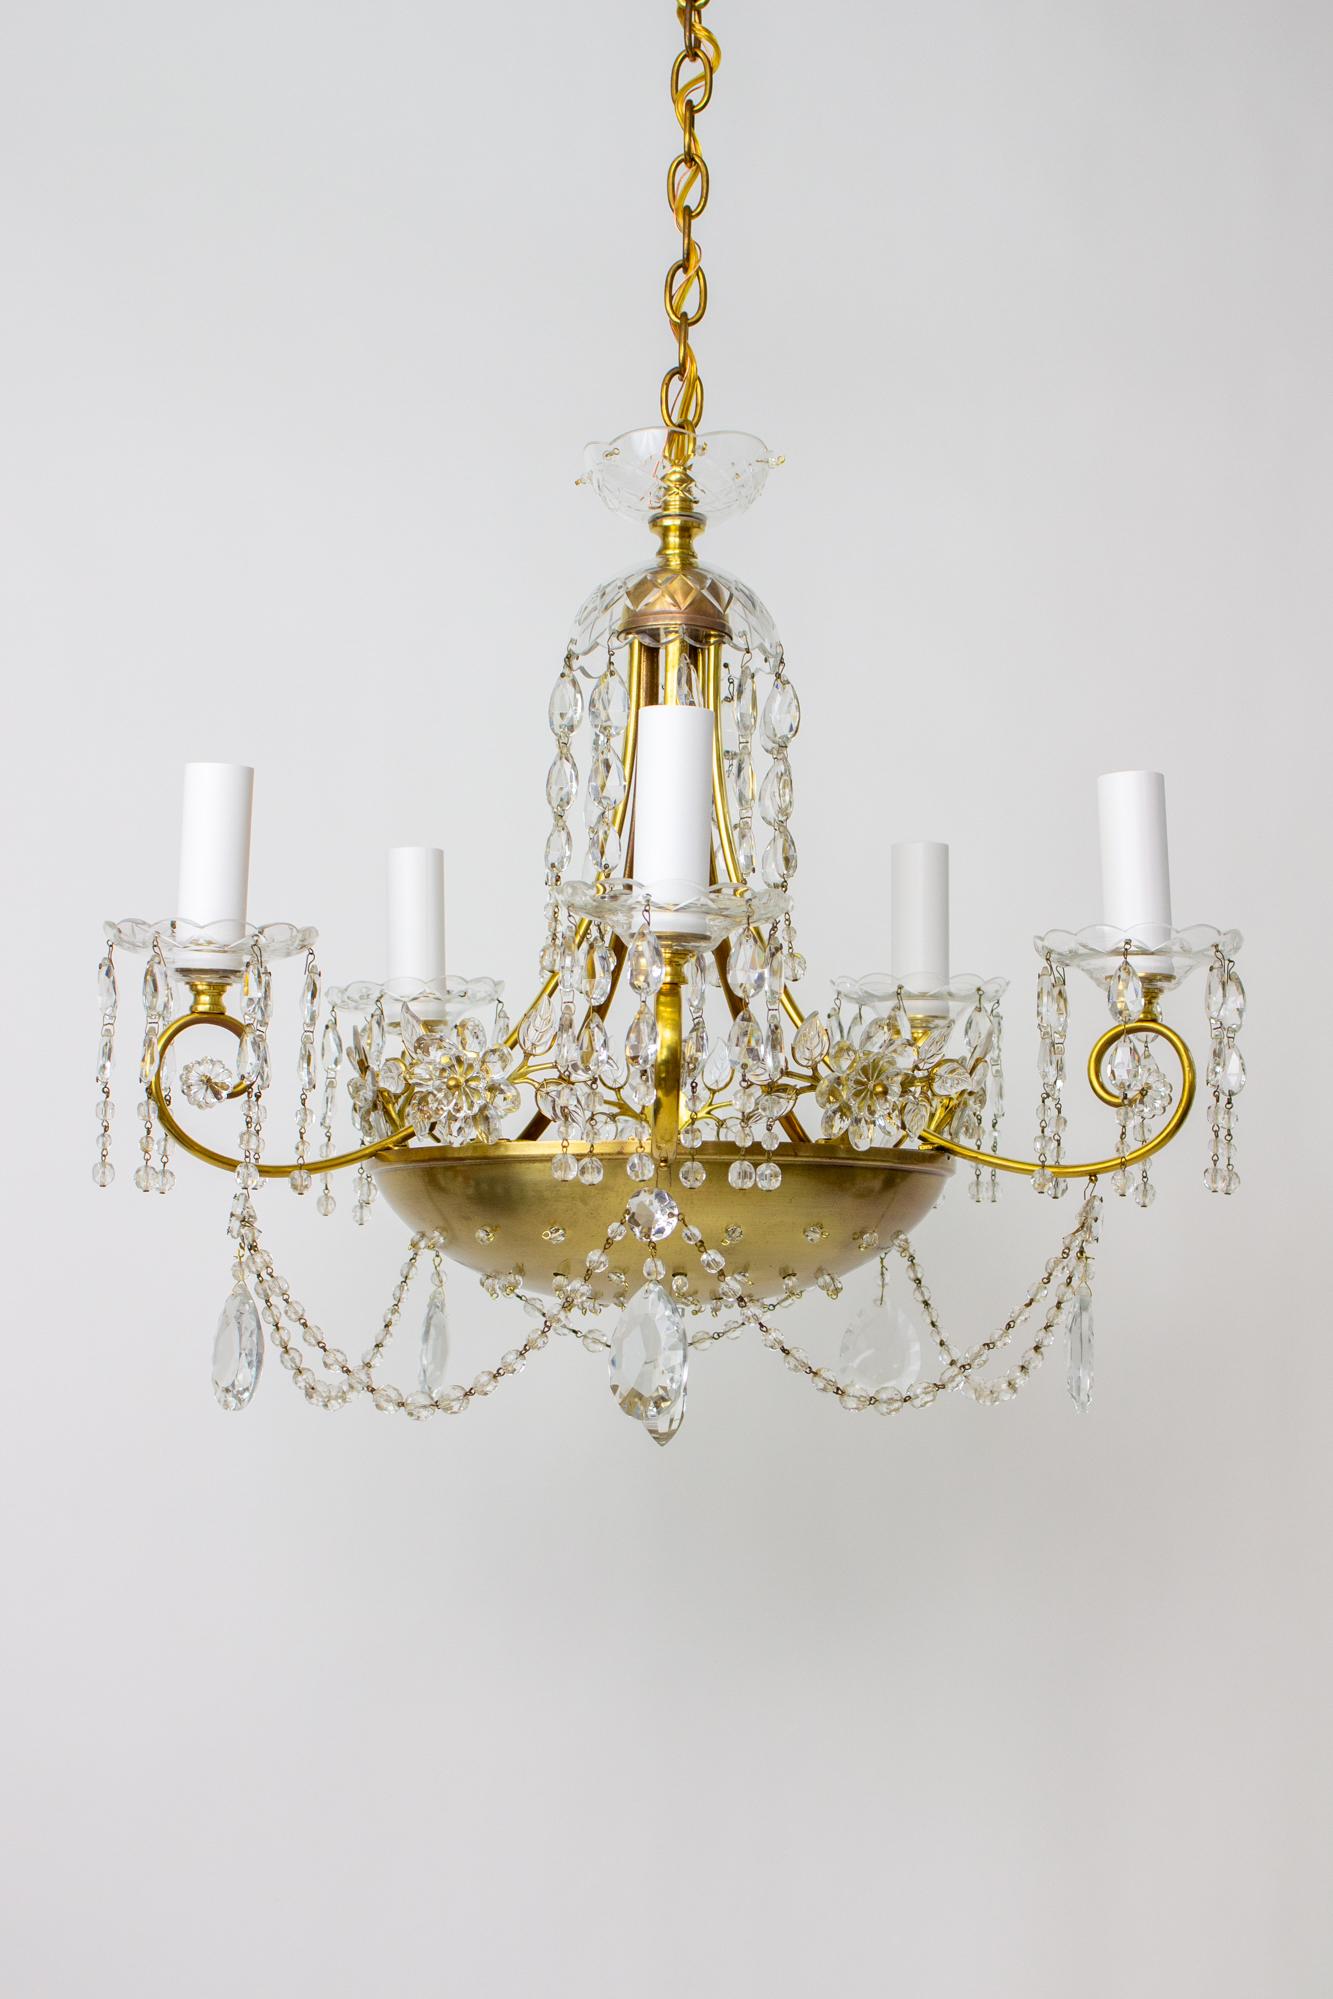 Introducing our exquisite 20th Century German Brass and Crystal Chandelier, a timeless piece that combines craftsmanship, elegance, and vintage allure. This stunning chandelier, reminiscent of the Maison Bagues style, showcases meticulous attention